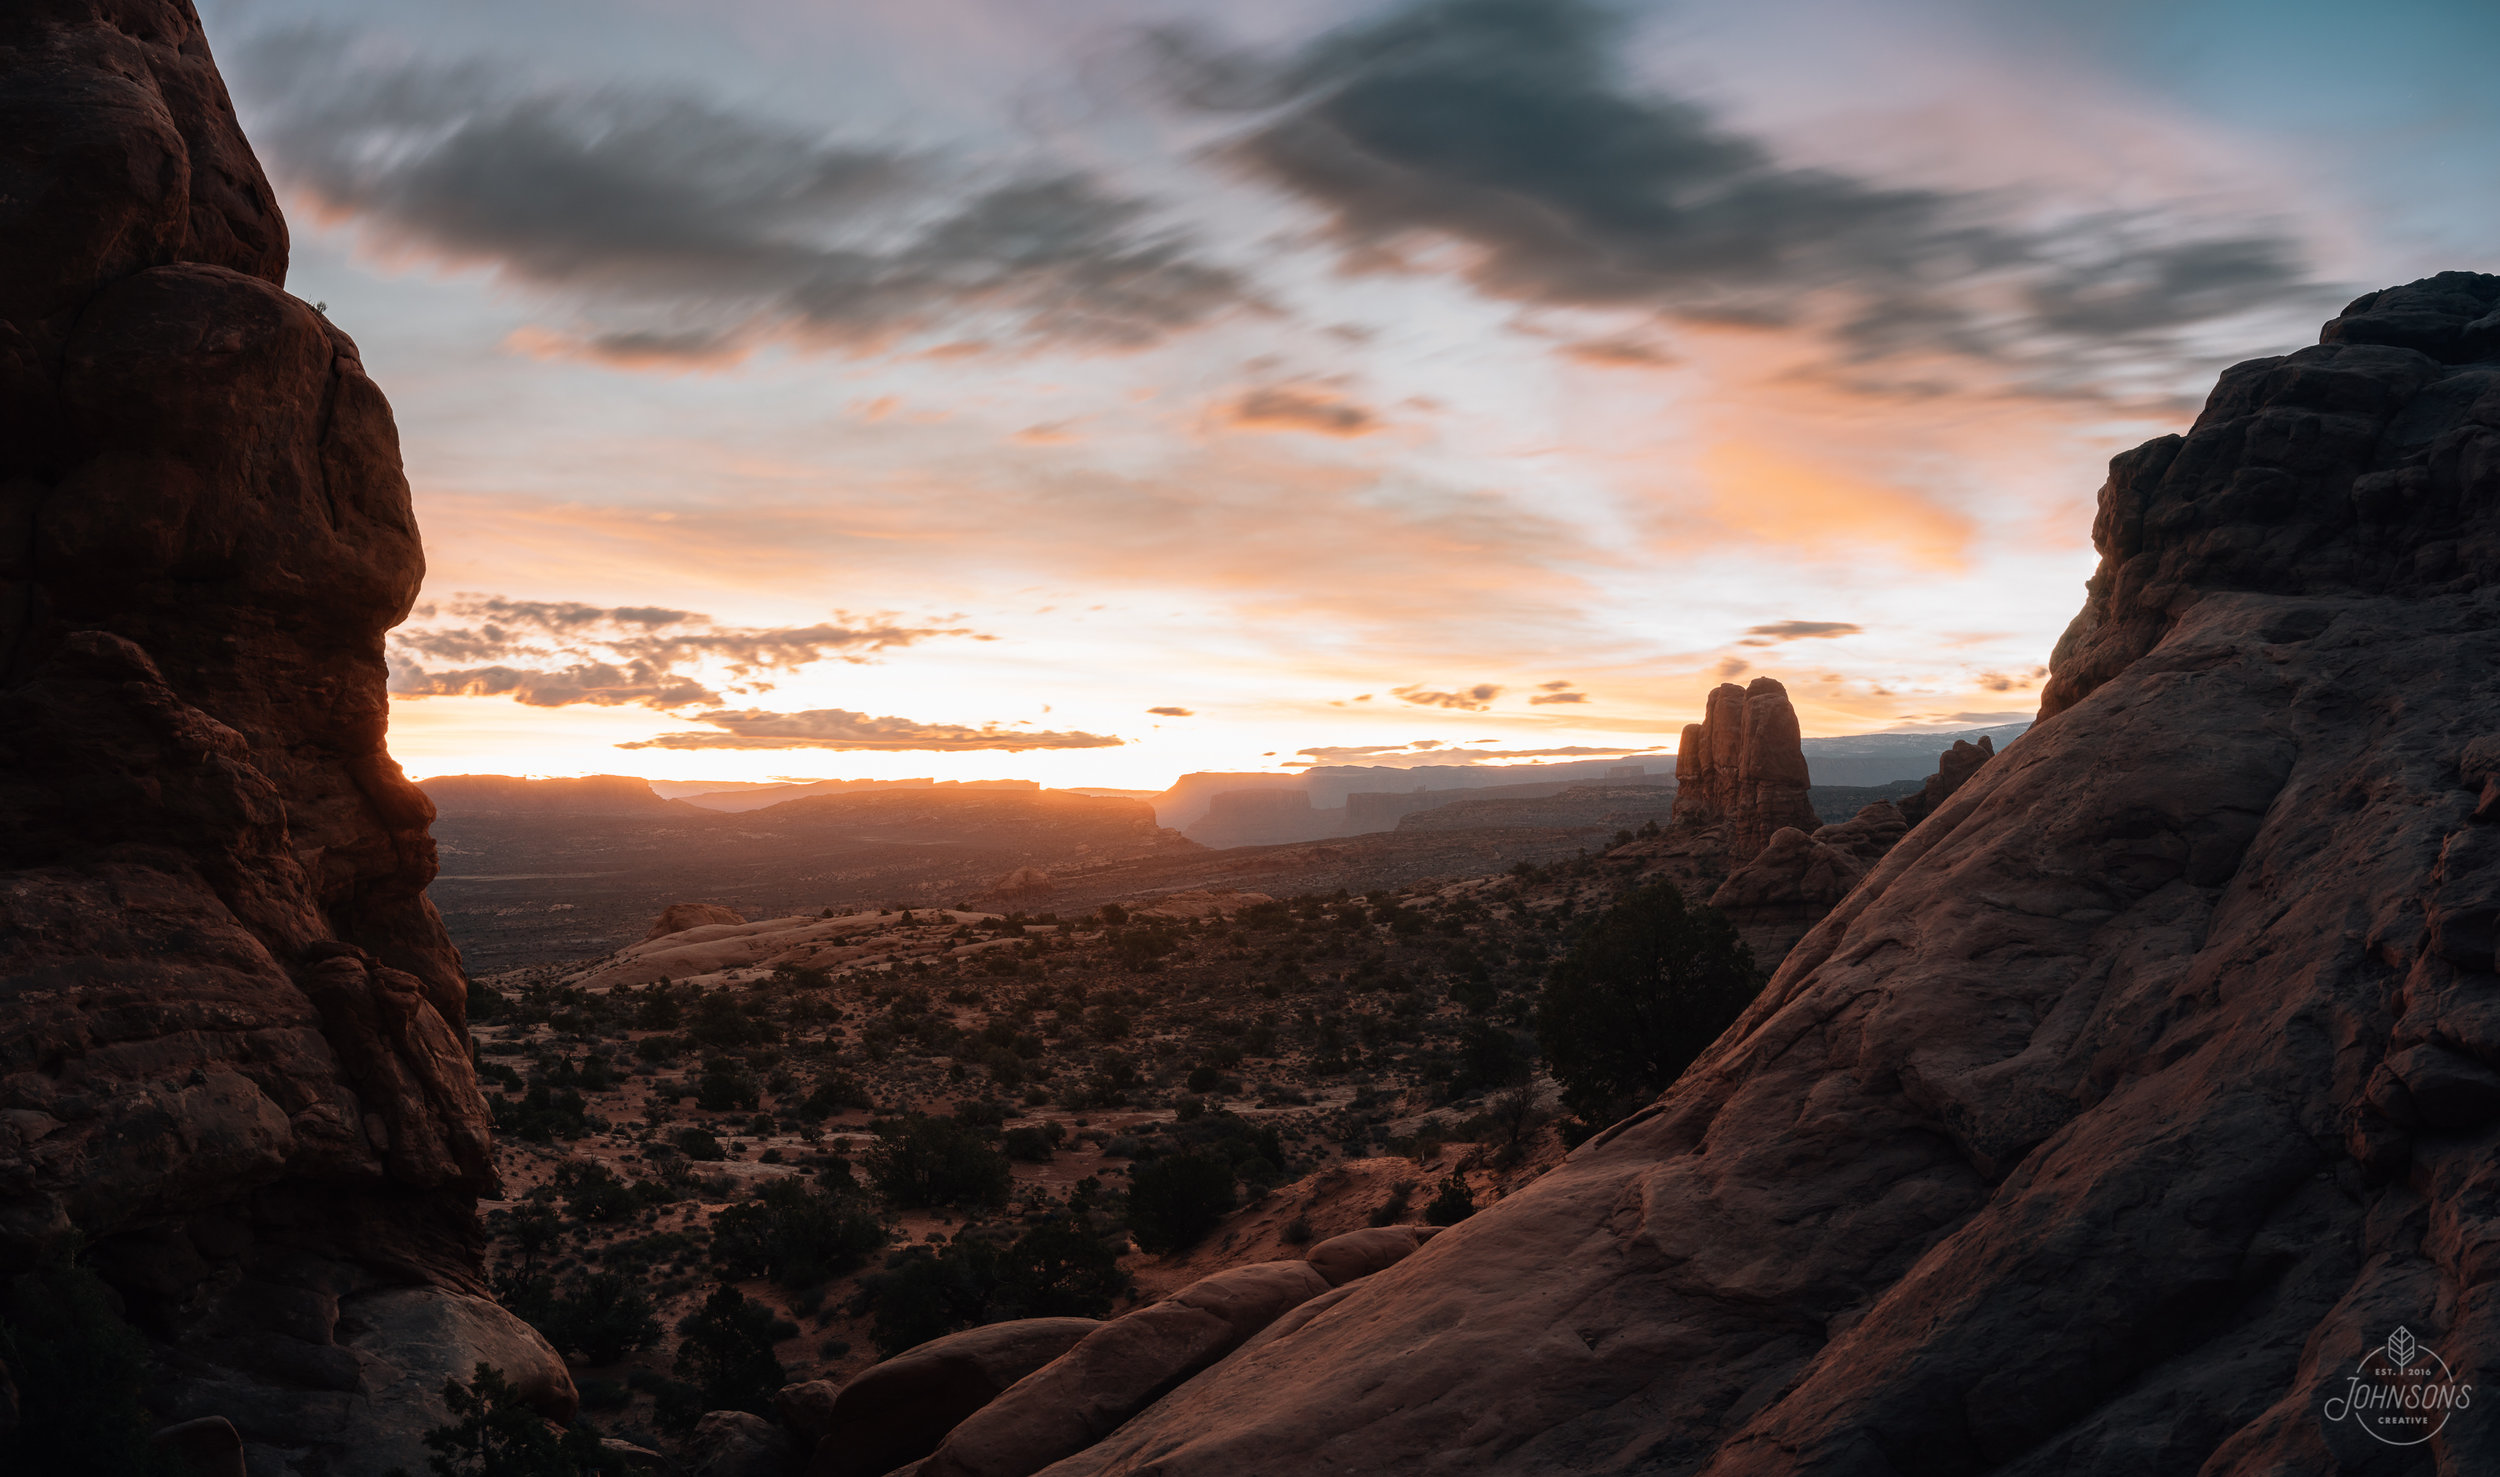  Sony a7rii |&nbsp;35mm 2.8 |&nbsp;f7.1 | 30 sec |&nbsp;ISO 400 | 5 image stitched panoramic     This is looking the opposite direction than the last photo of turret arch. The rock face at the very left is where you climb up to to get the next image'